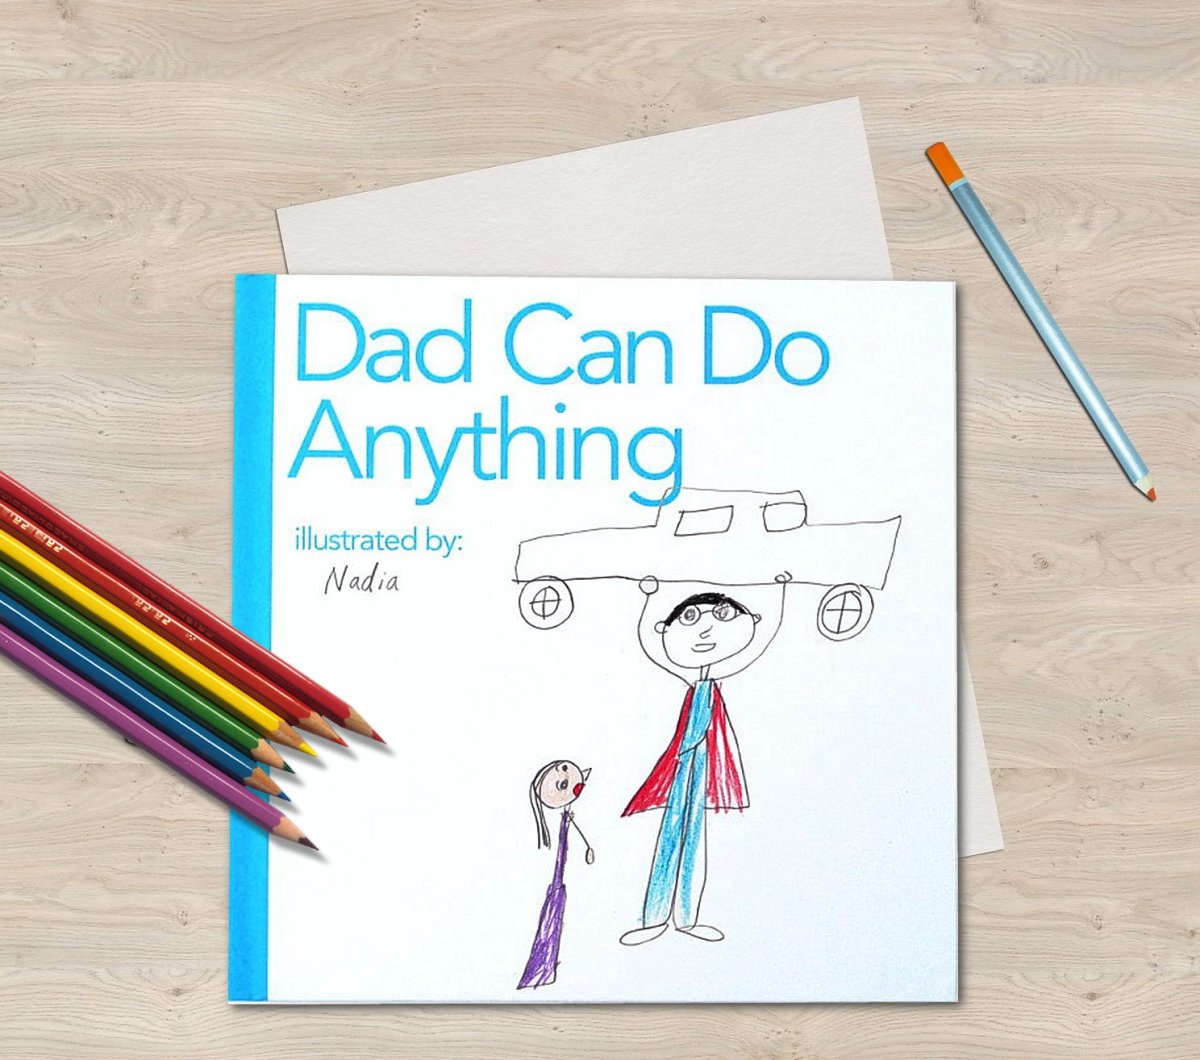 Kids can illustrate this clever book about a hero dad from cover to cover and give it as a Father’s Day gift.